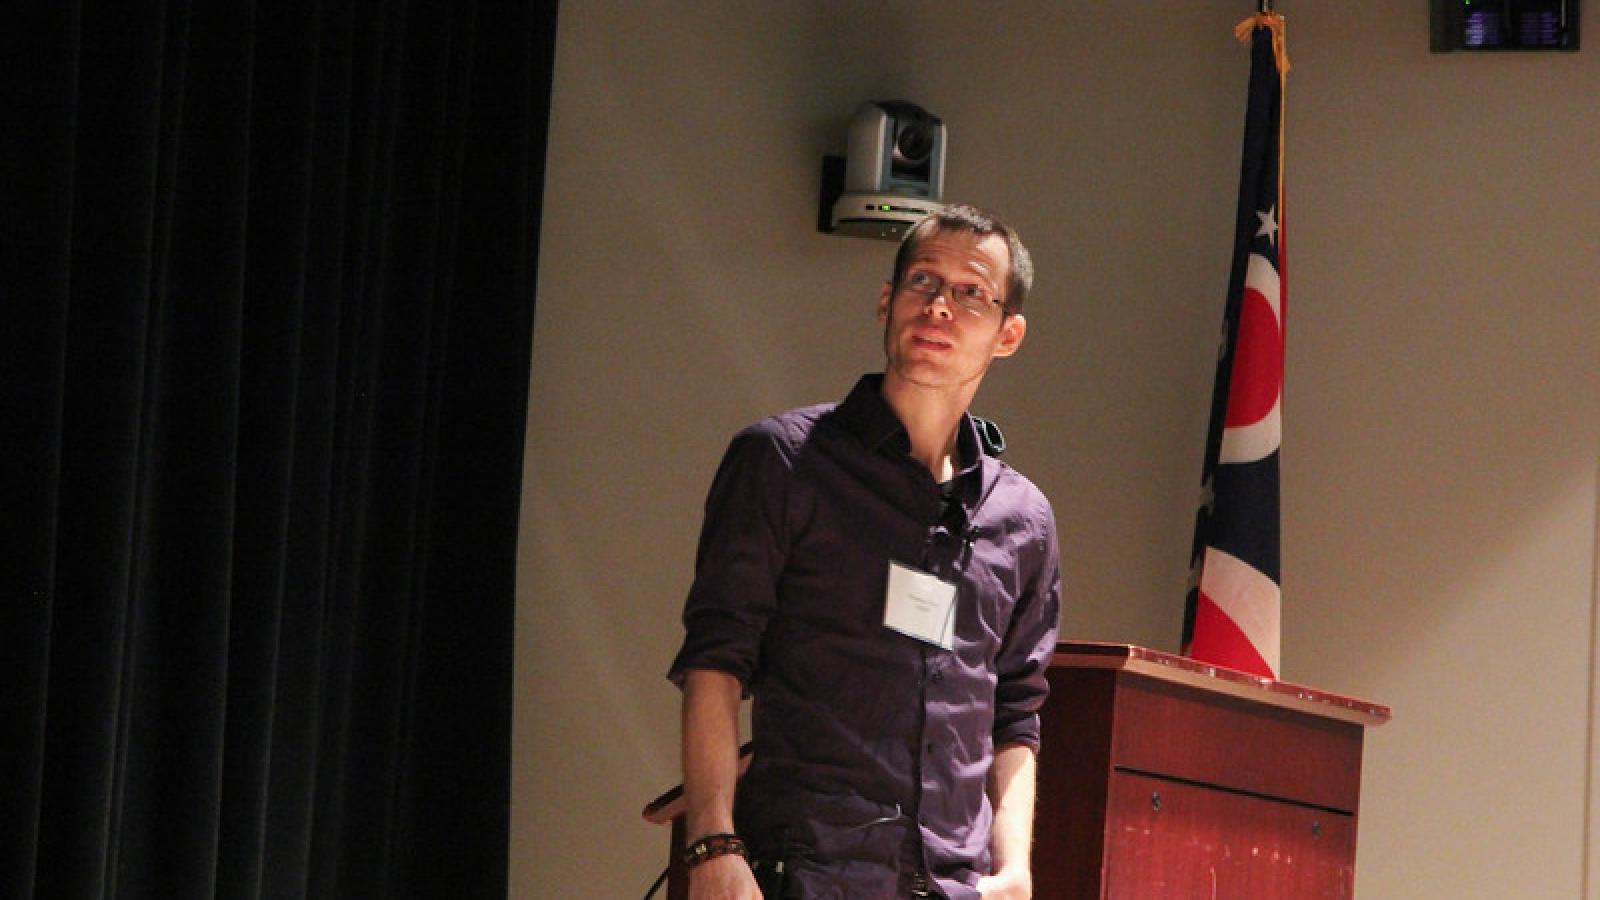 A student gives a talk at the annual symposium